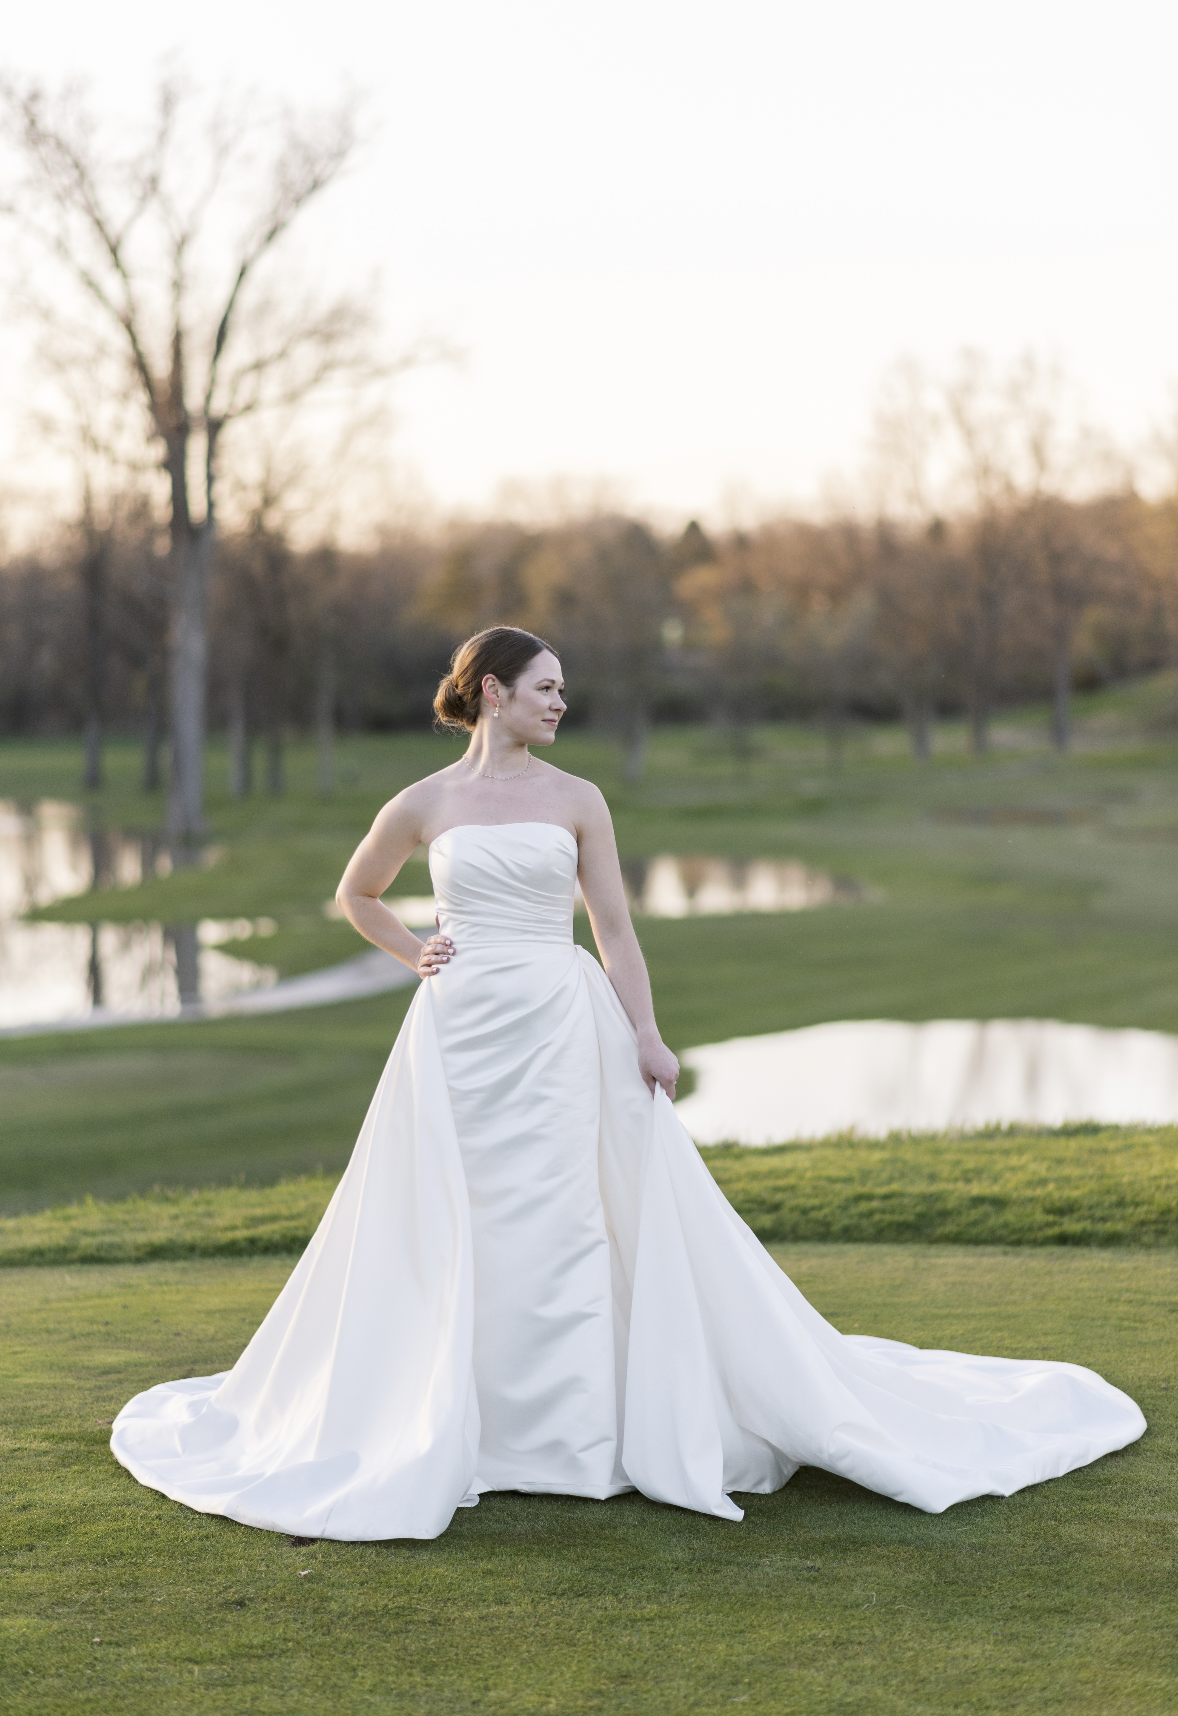 Bride looking to the right on a golf course after the wedding ceremony. Her dress is large and beautiful on the spring grass.